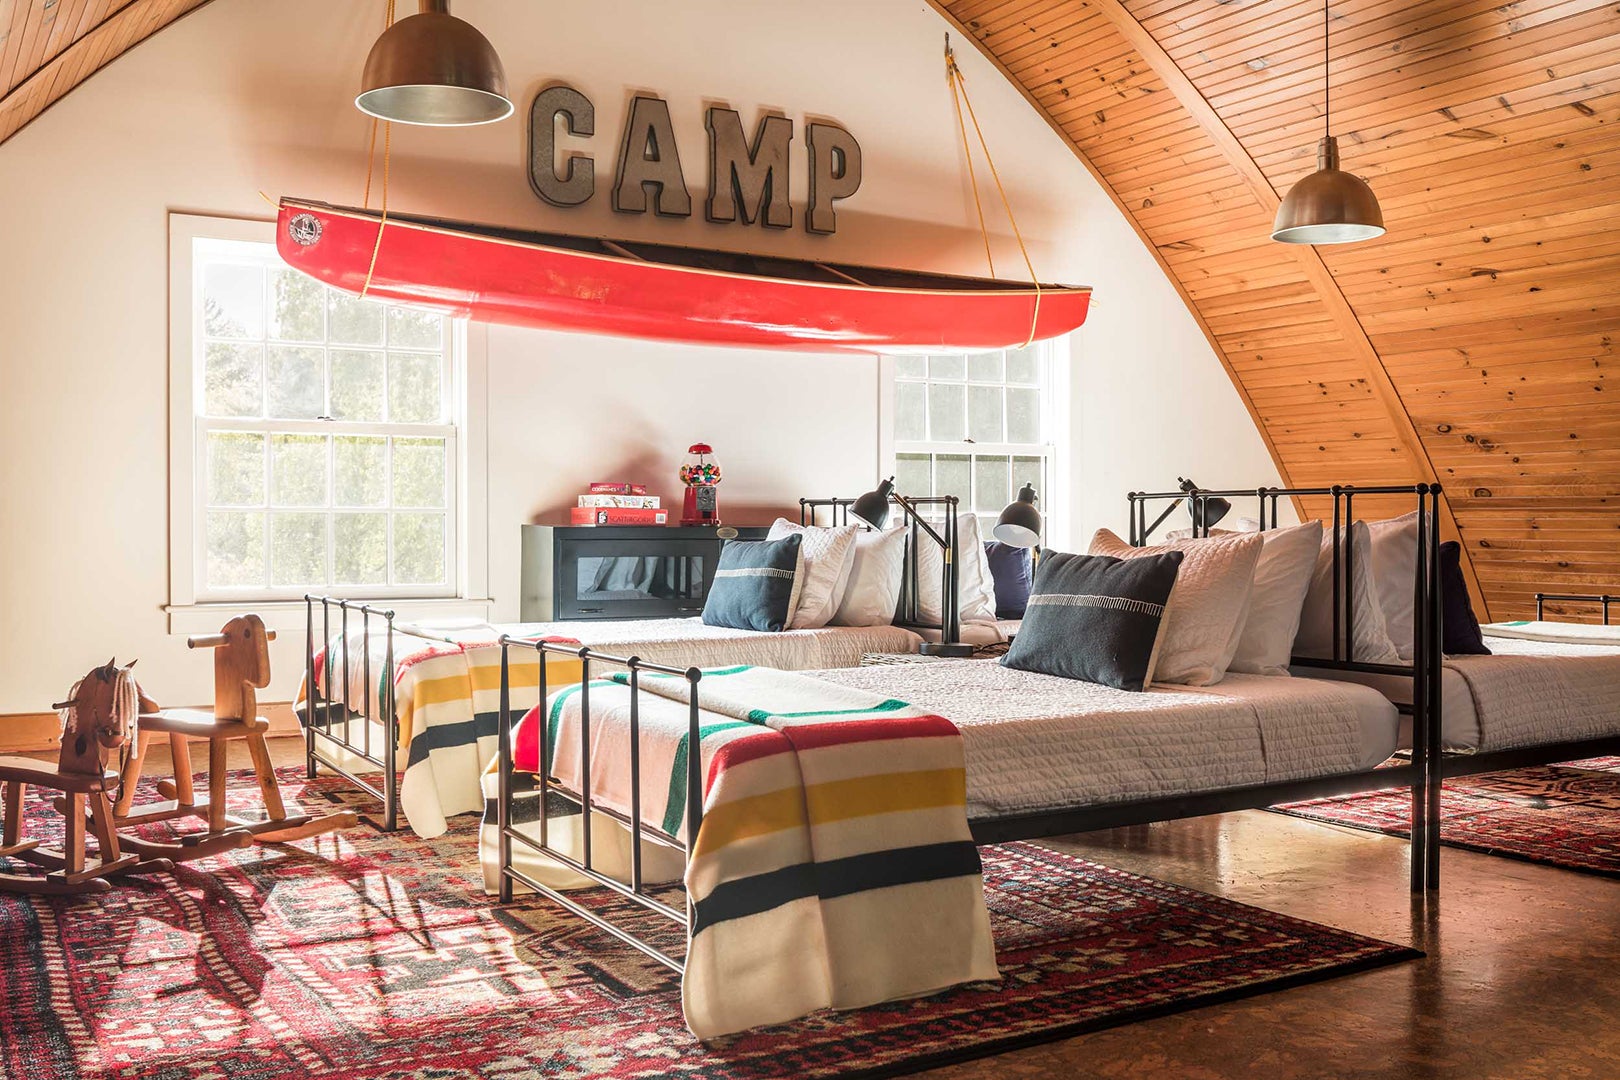 Canoe Hanging in Guest Room of Barn